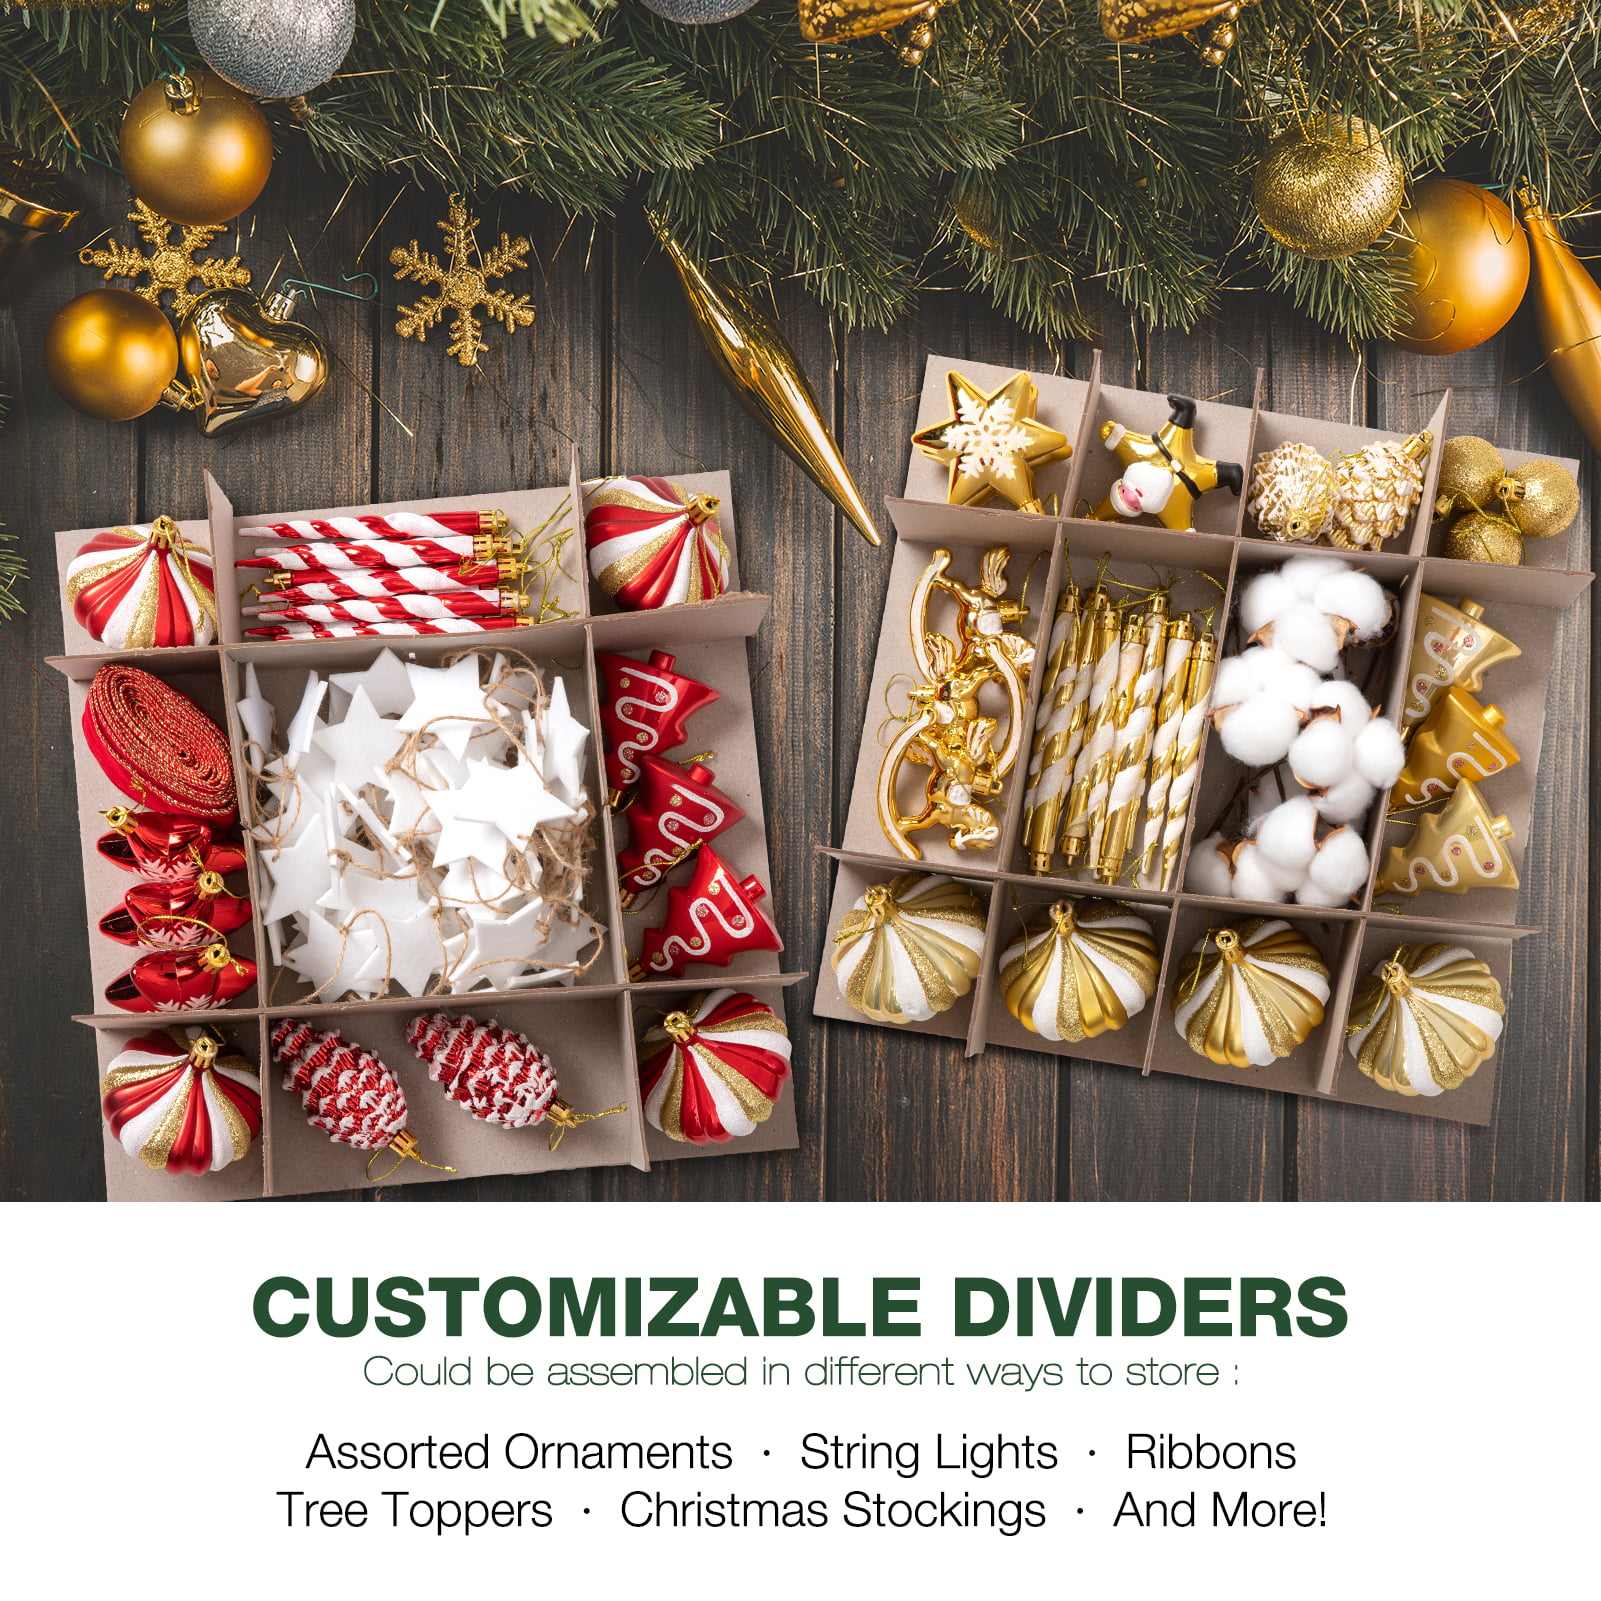  Durable Non-Woven Christmas Ornament Storage Box with Removable  lid, Stores up-to 64 Standard Holiday Ornaments & Xmas Decorations For  Seasons To come - 12 x 12 Inch 4 Layer Ornament Storage